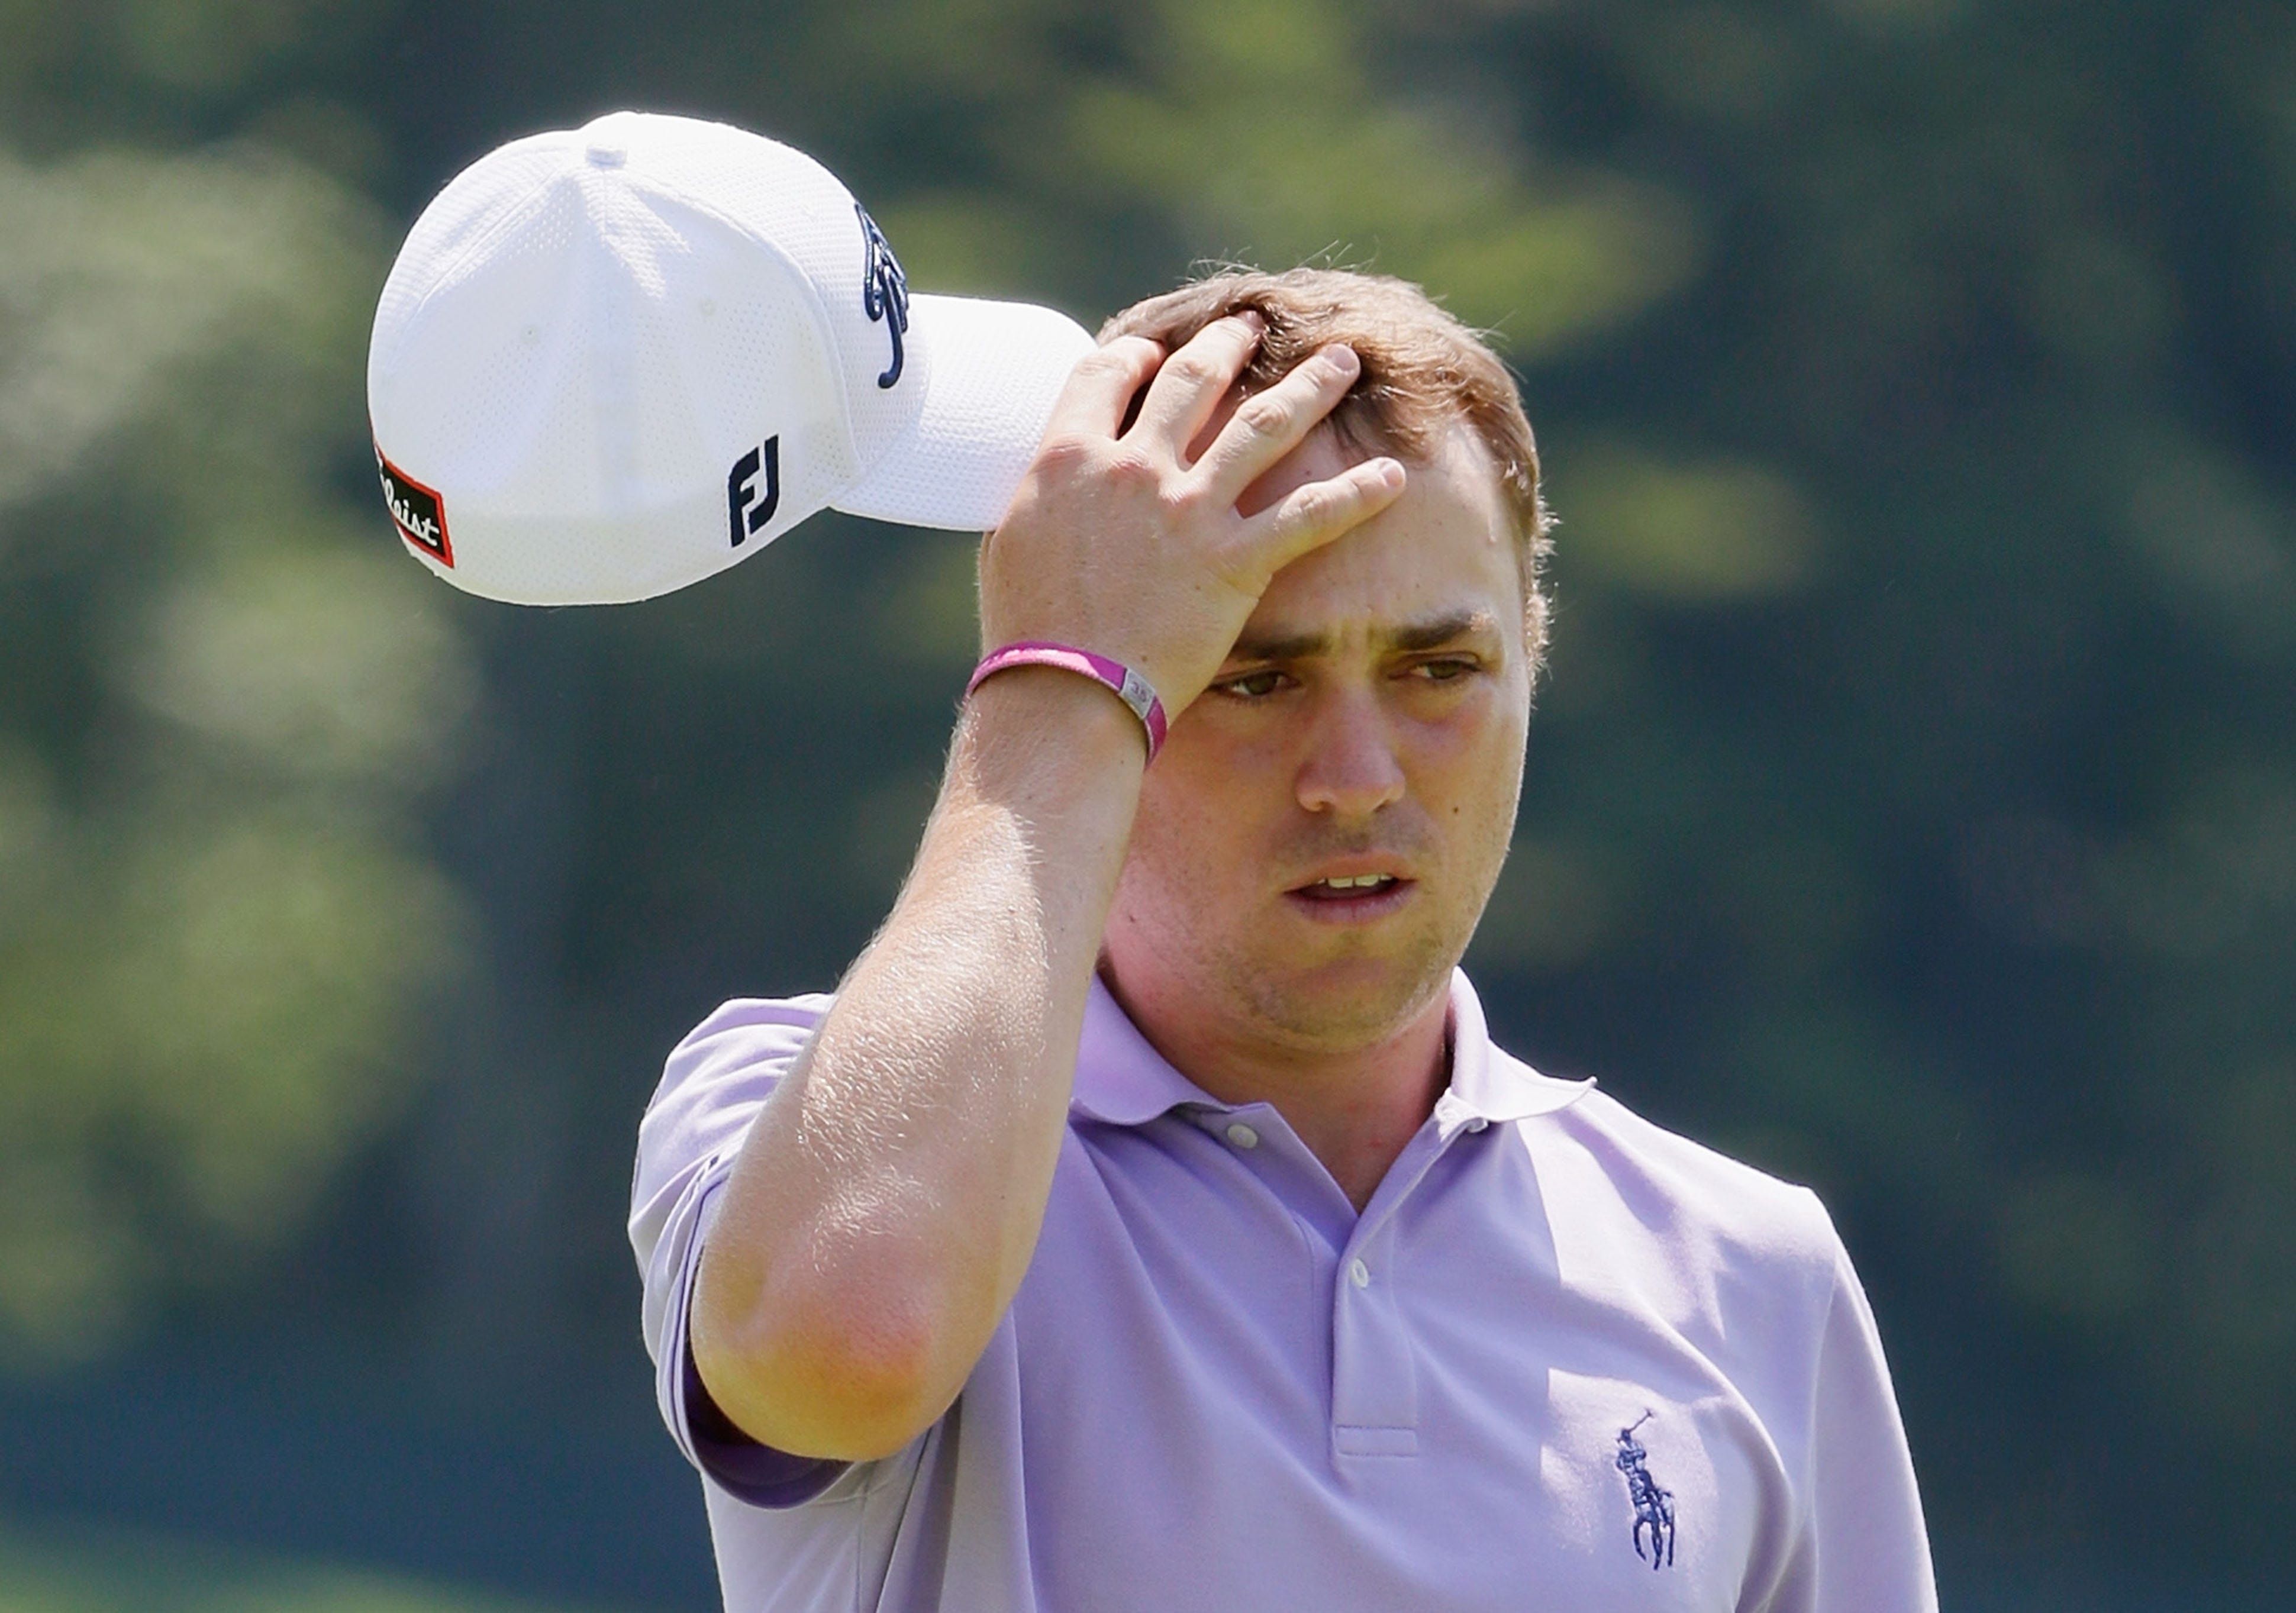 Justin Thomas received comically cruel note about his hair – Werner Teal